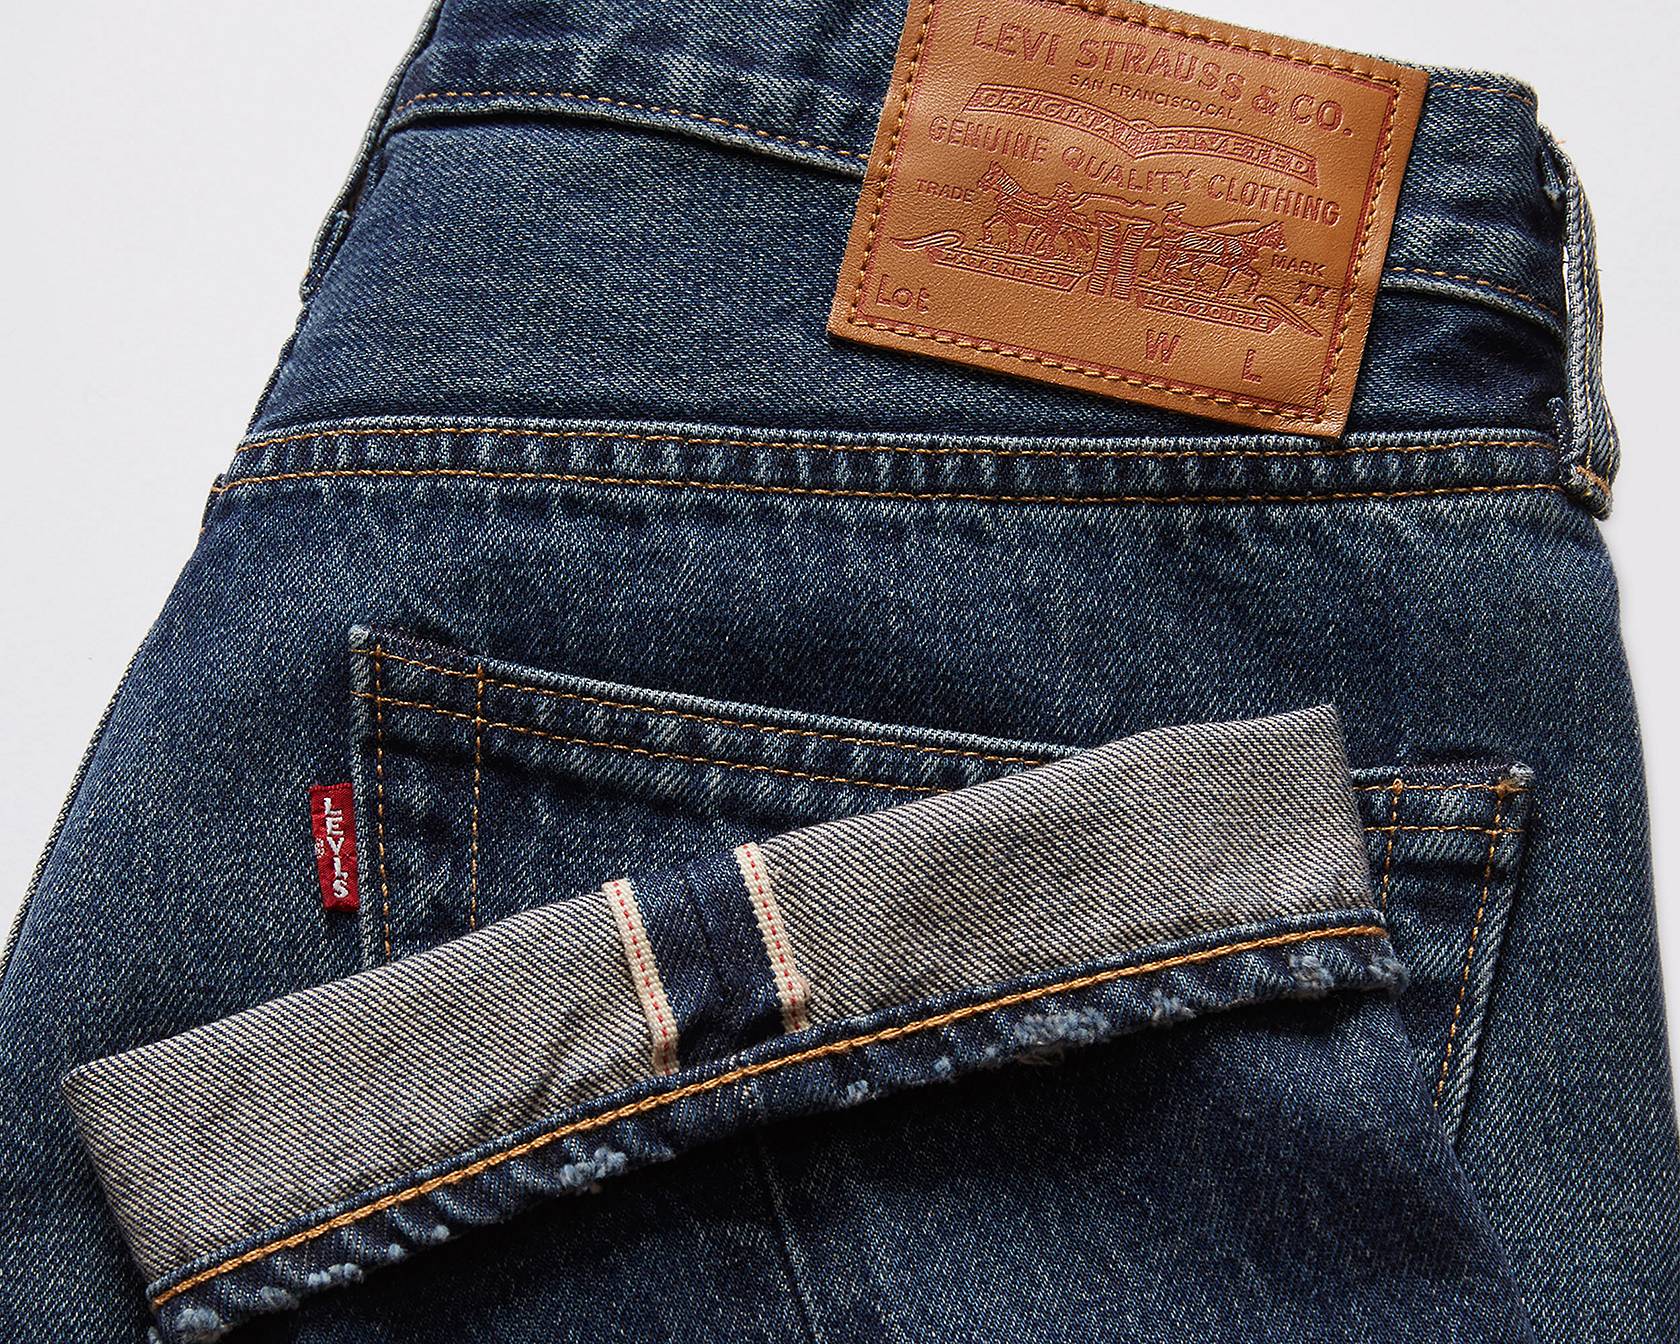 Closeup shot of selvedge jeans showing the signature ribbon stitching on the cuff